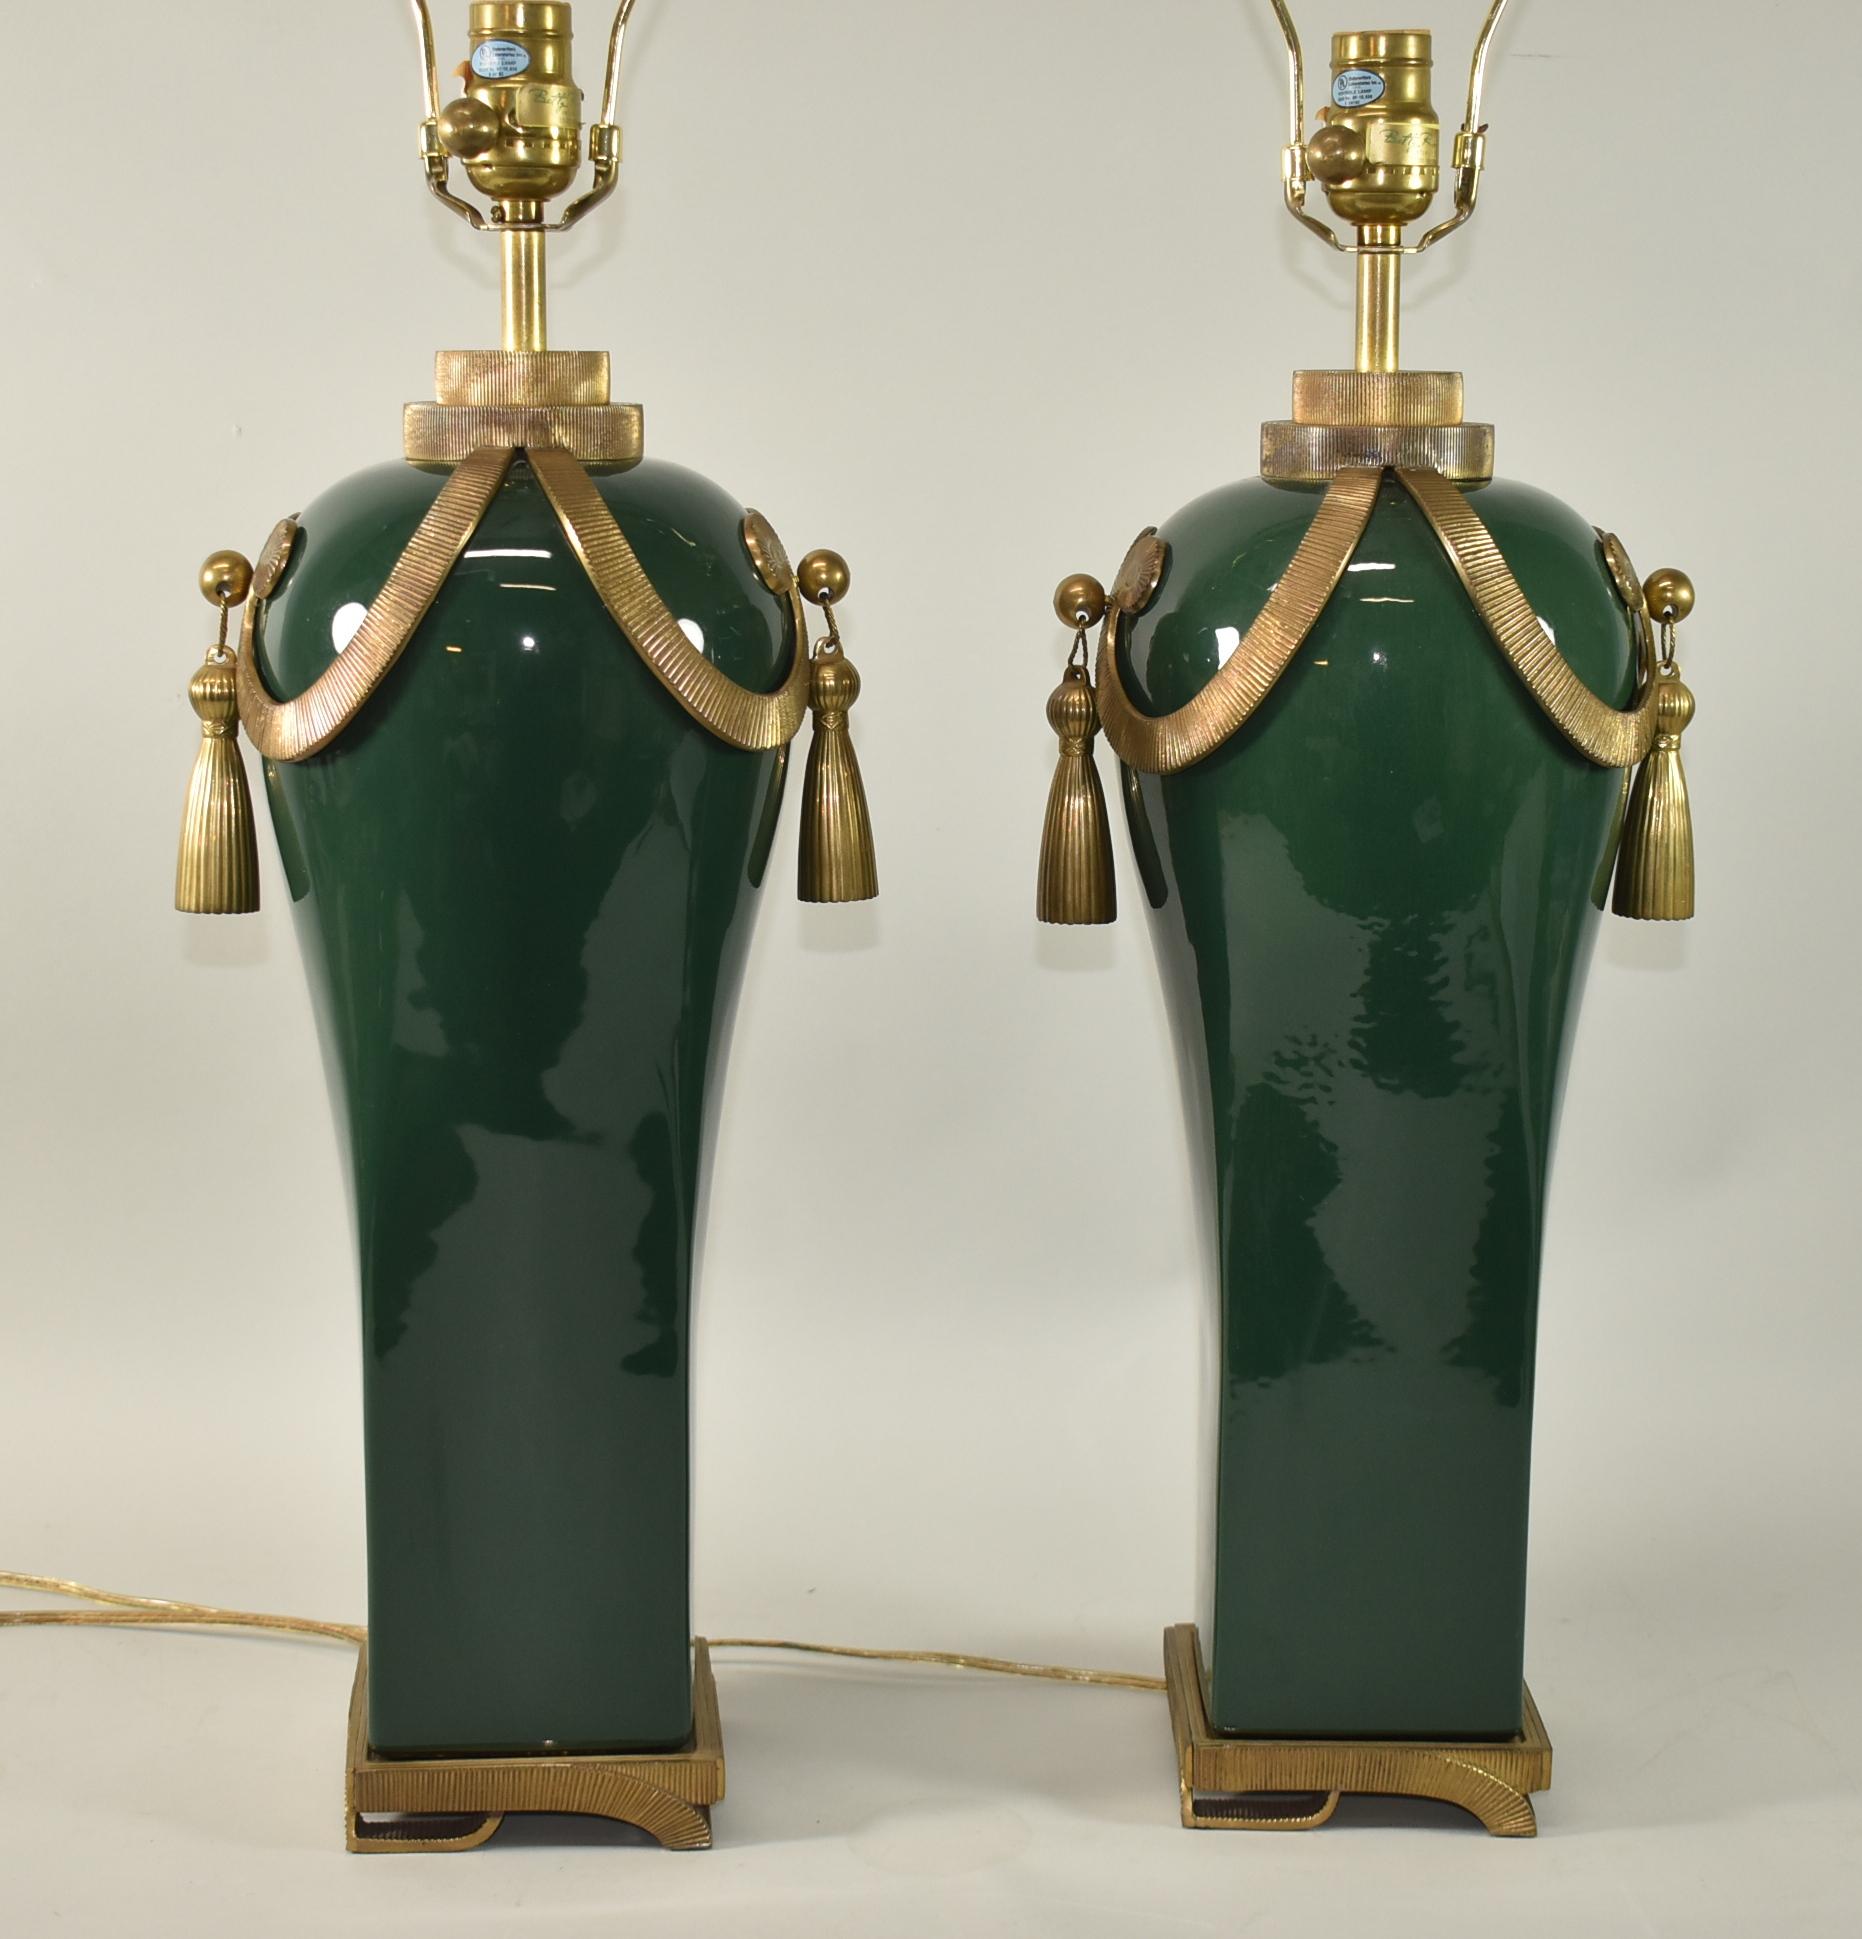 Pair of brass and dark green ceramic single socket table lamps. Large round brass knob, and brass detailing. Dimmable switch. With shade 36